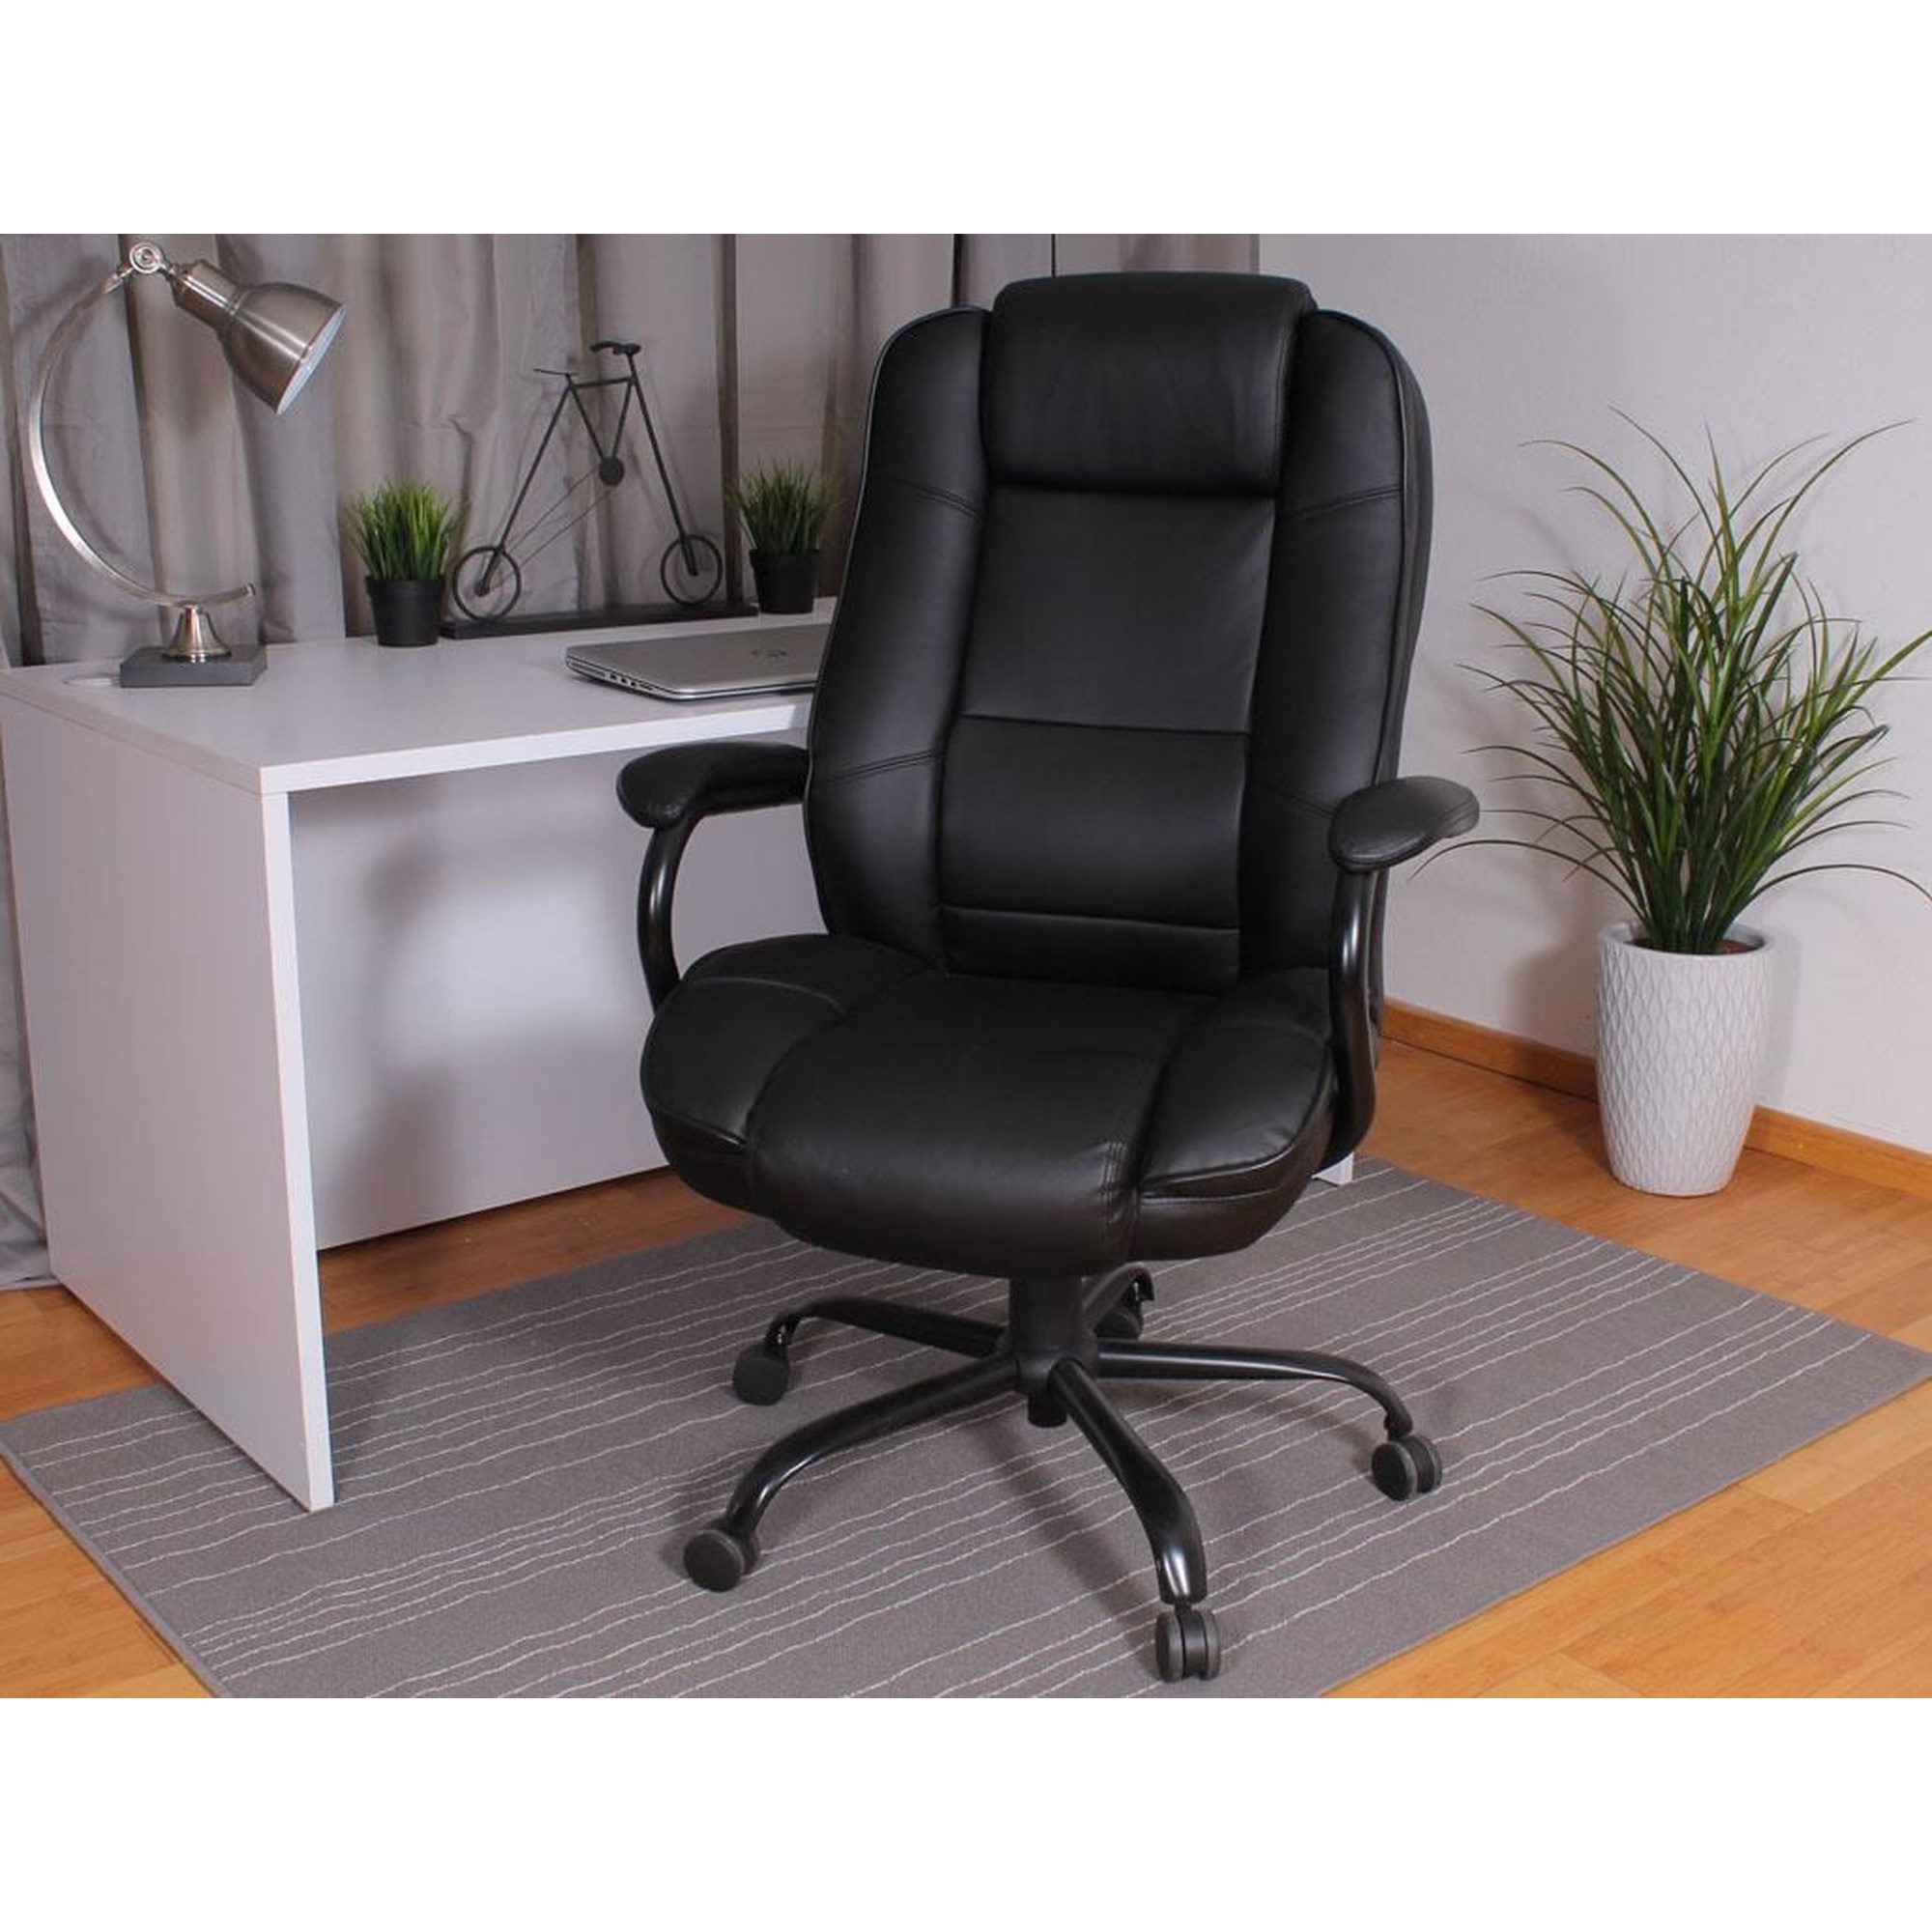 https://imageresizer4.furnituredealer.net/img/remote/images.furnituredealer.net/img/products%2Fpresidential_seating%2Fcolor%2Fexecutive%20chairs_b992bk-b08hn3m96cuo-_53n_ncvoa.jpg?width=2000&height=2000&scale=both